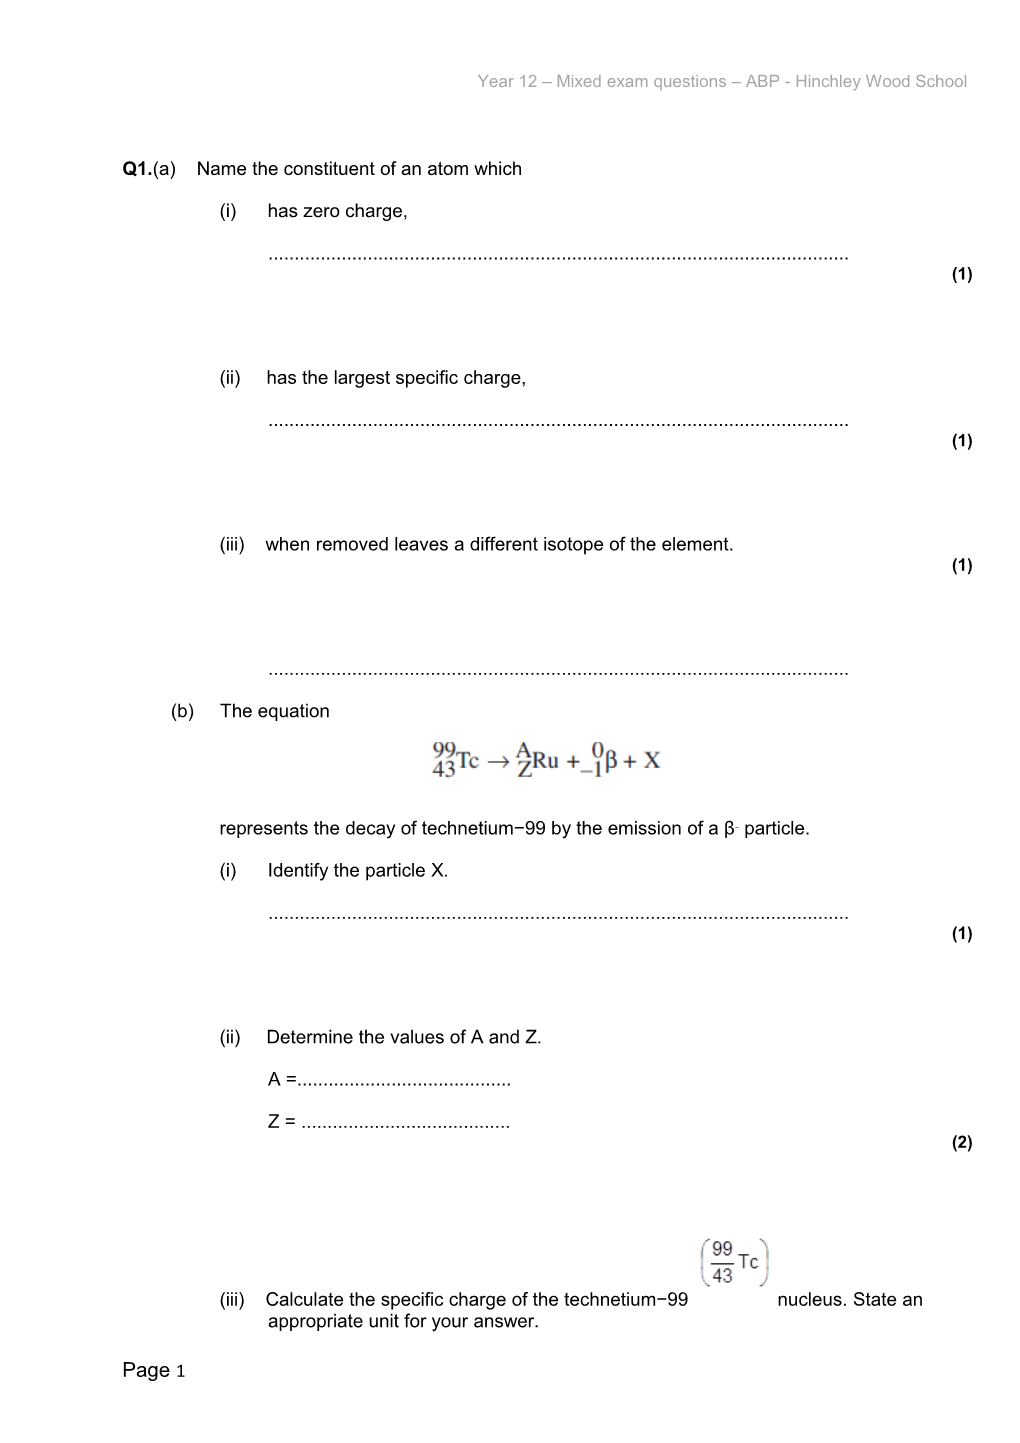 Year 12 Mixed Exam Questions ABP - Hinchley Wood School